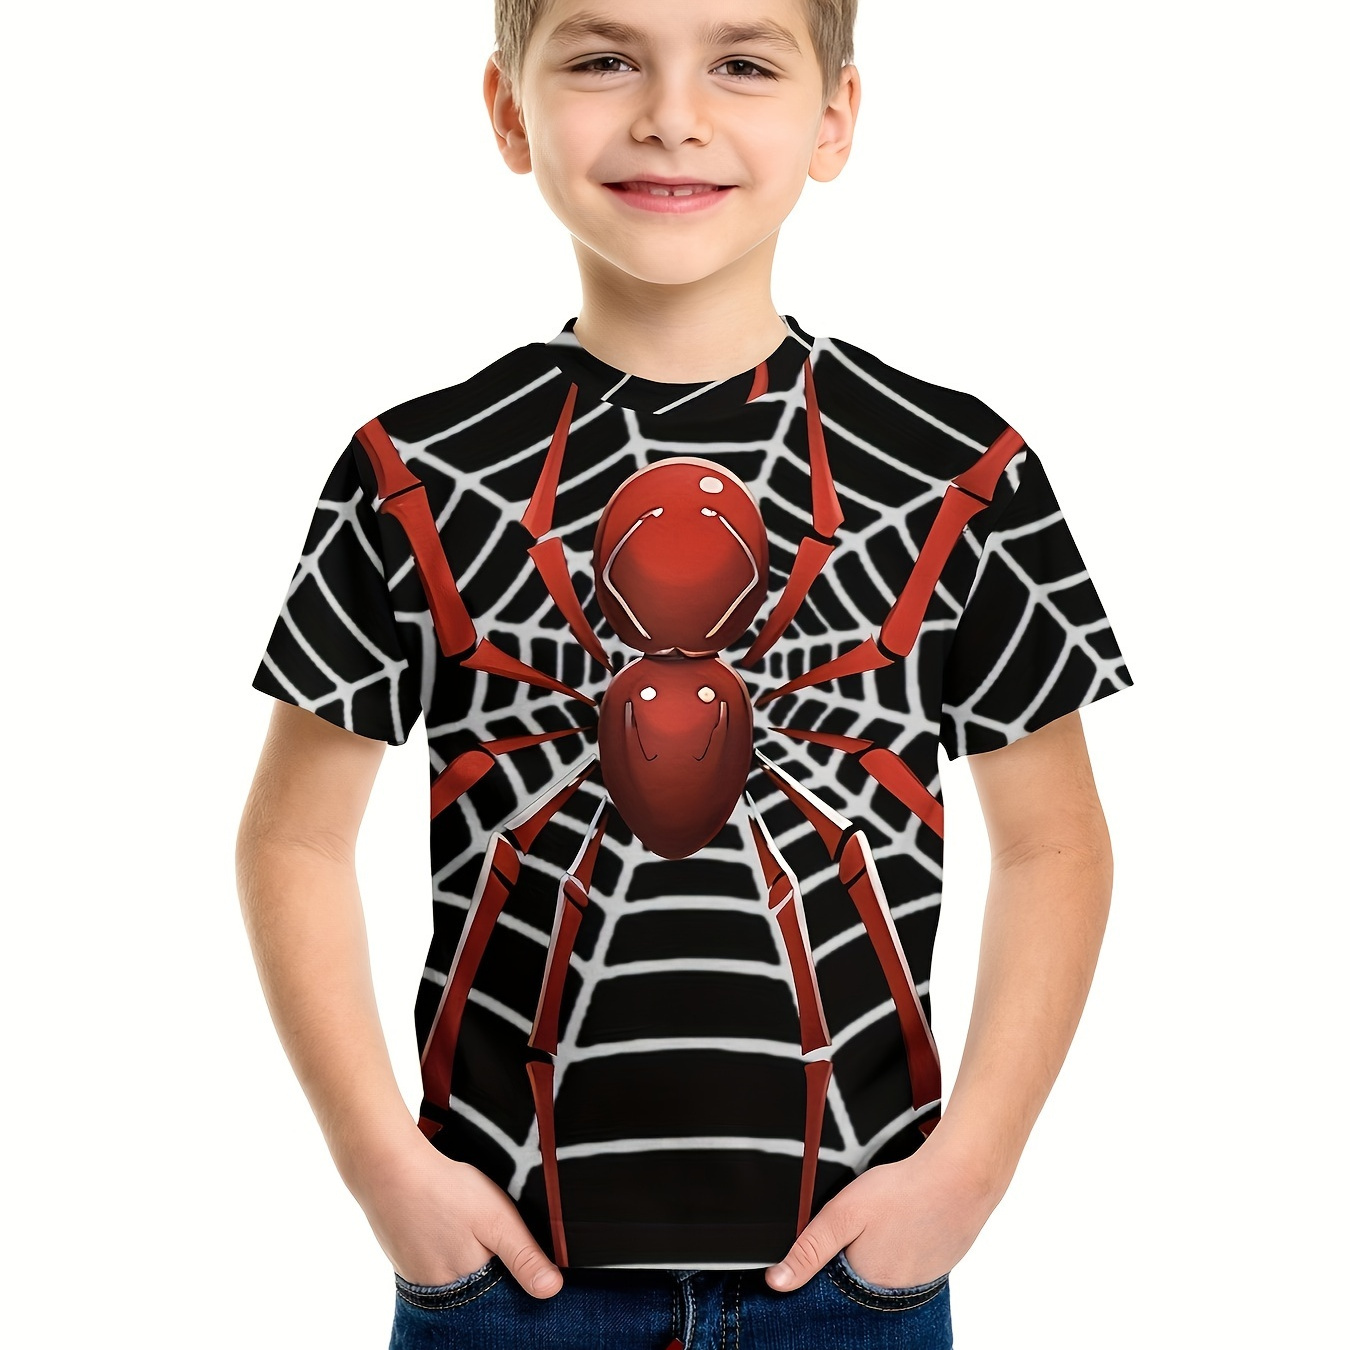 

Boys Stylish Spider Pattern Creative T-shirt, Casual Lightweight Comfy Short Sleeve Tee Tops, Kids Clothing For Summer